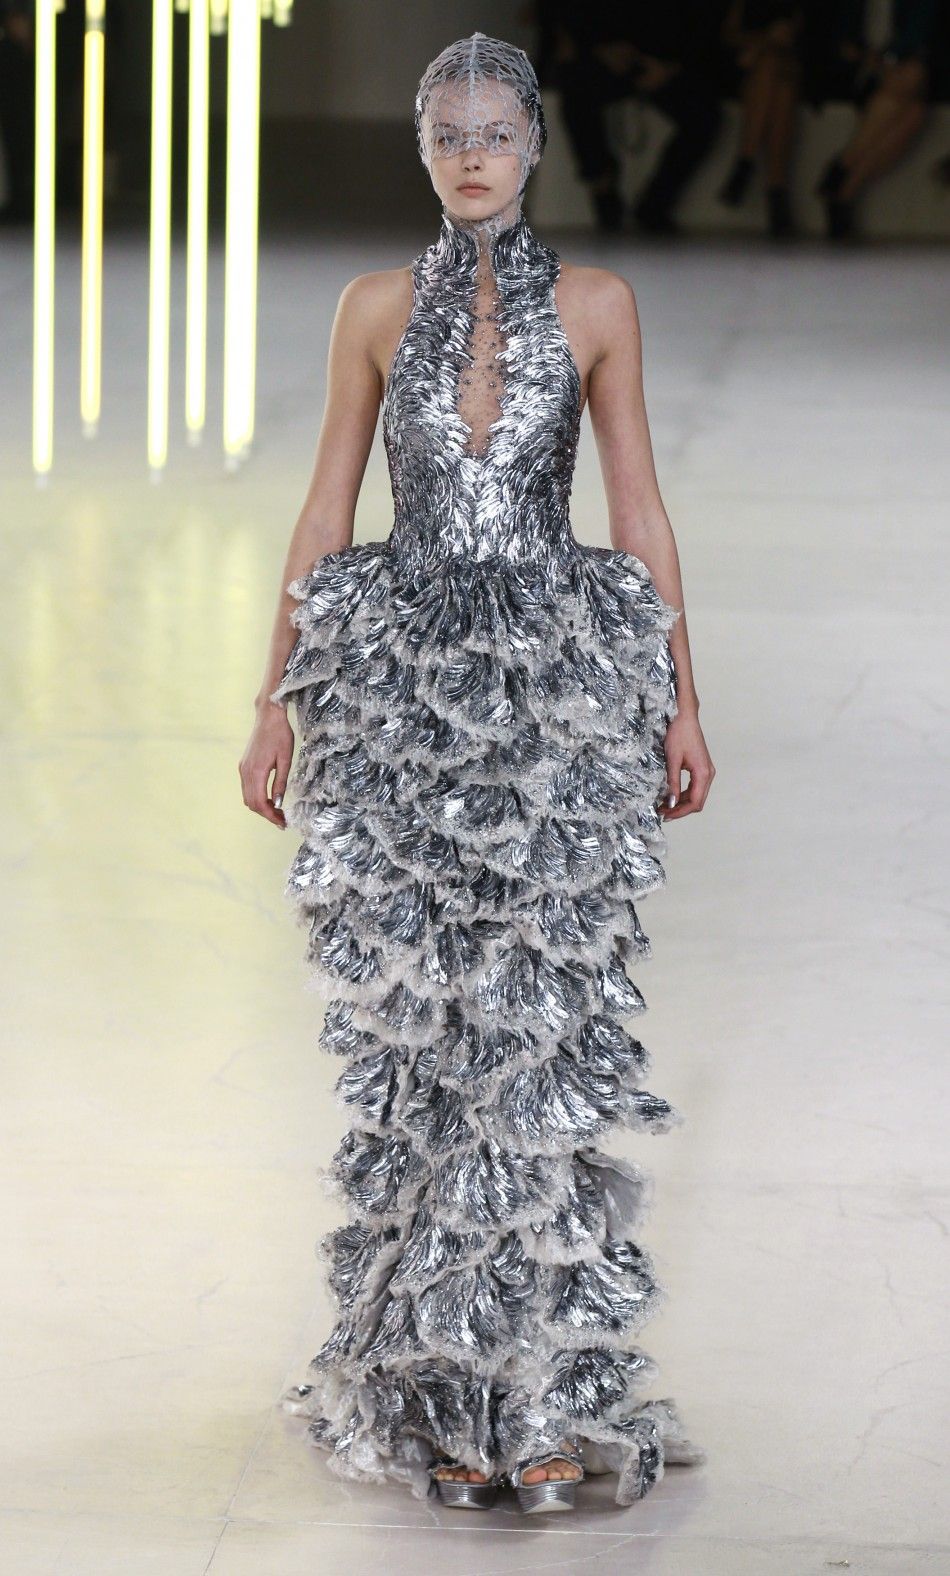 Paris Fashion Week Sarah Burtons Bold and Brilliant Creations for Alexander McQueen Leaves Awestruck PHOTOS